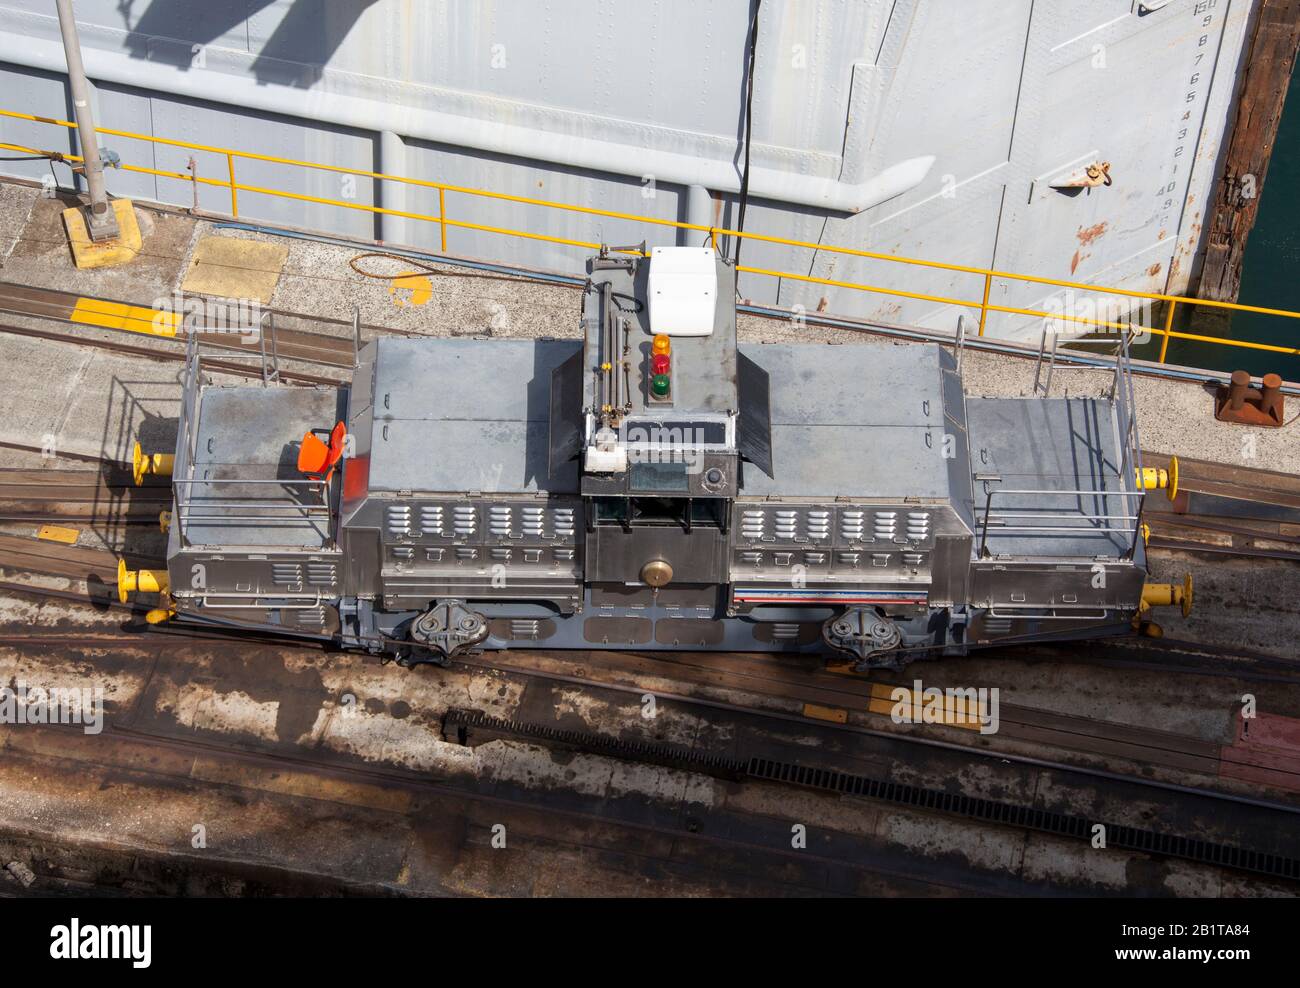 The view from above of an electric locomotive known as the mule that is guiding ships through the narrow canal (Panama). Stock Photo